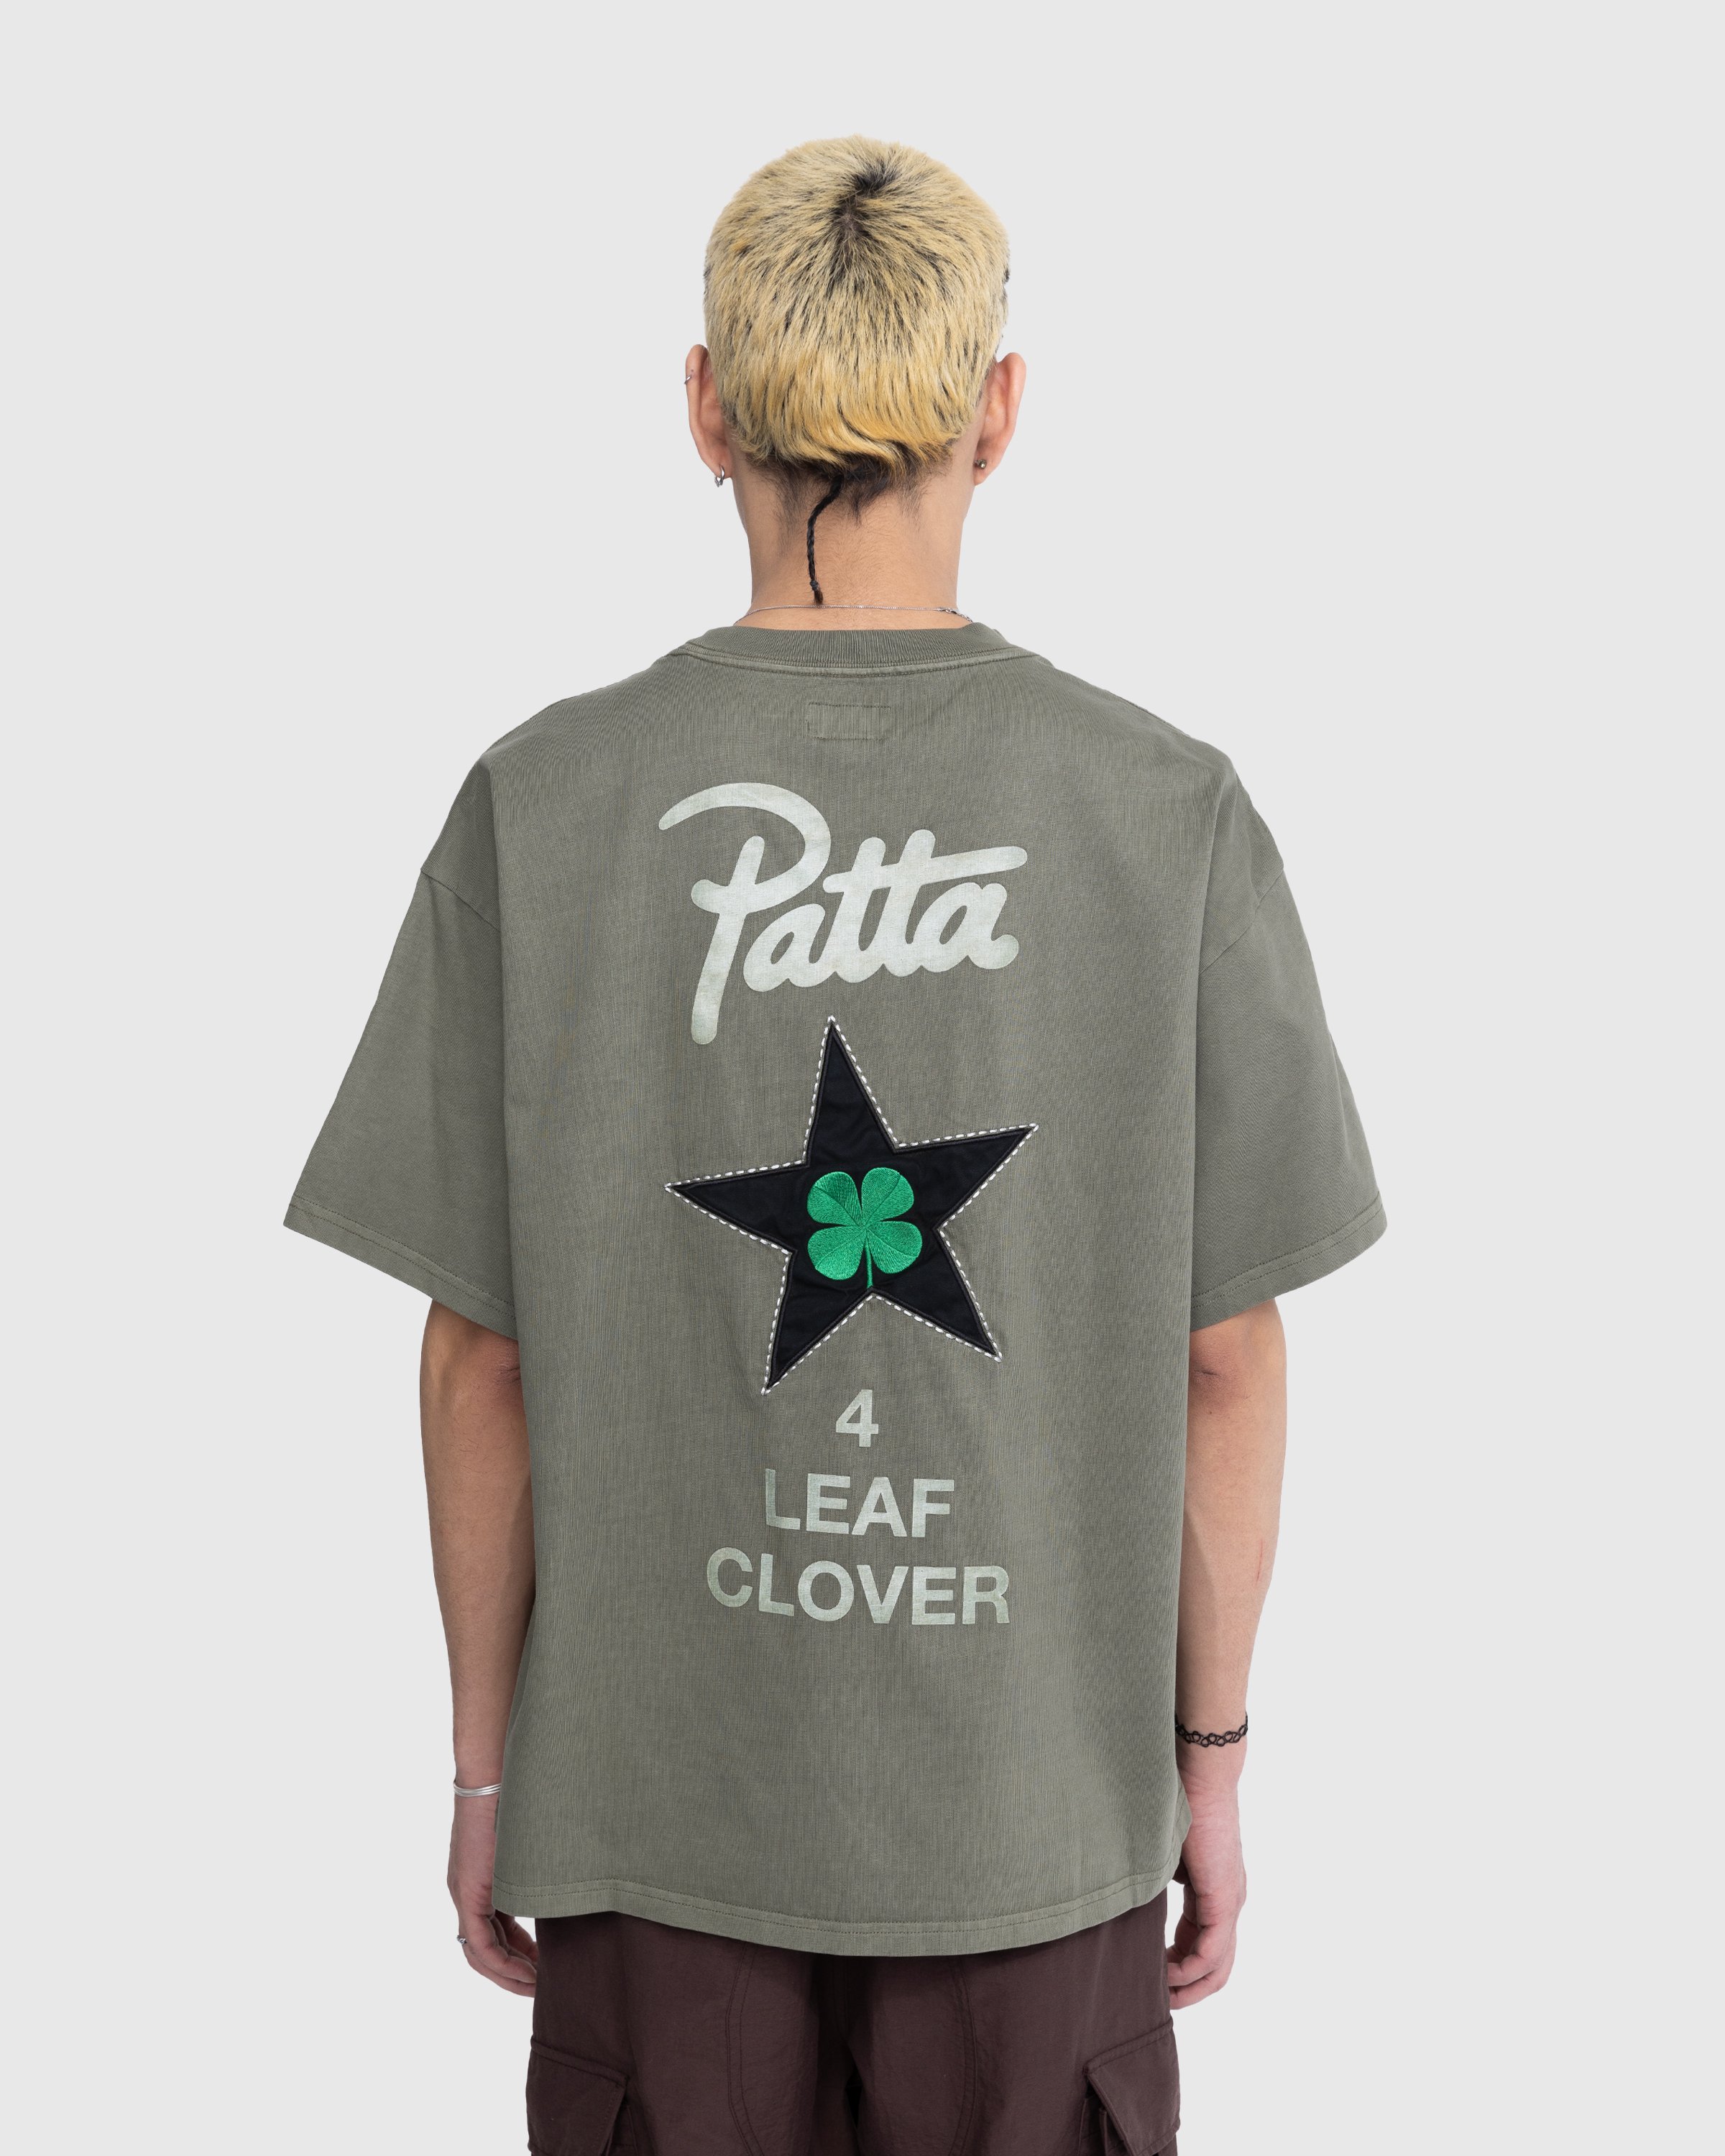 Patta x Converse - Tee Burnt Olive - Clothing - Brown - Image 4